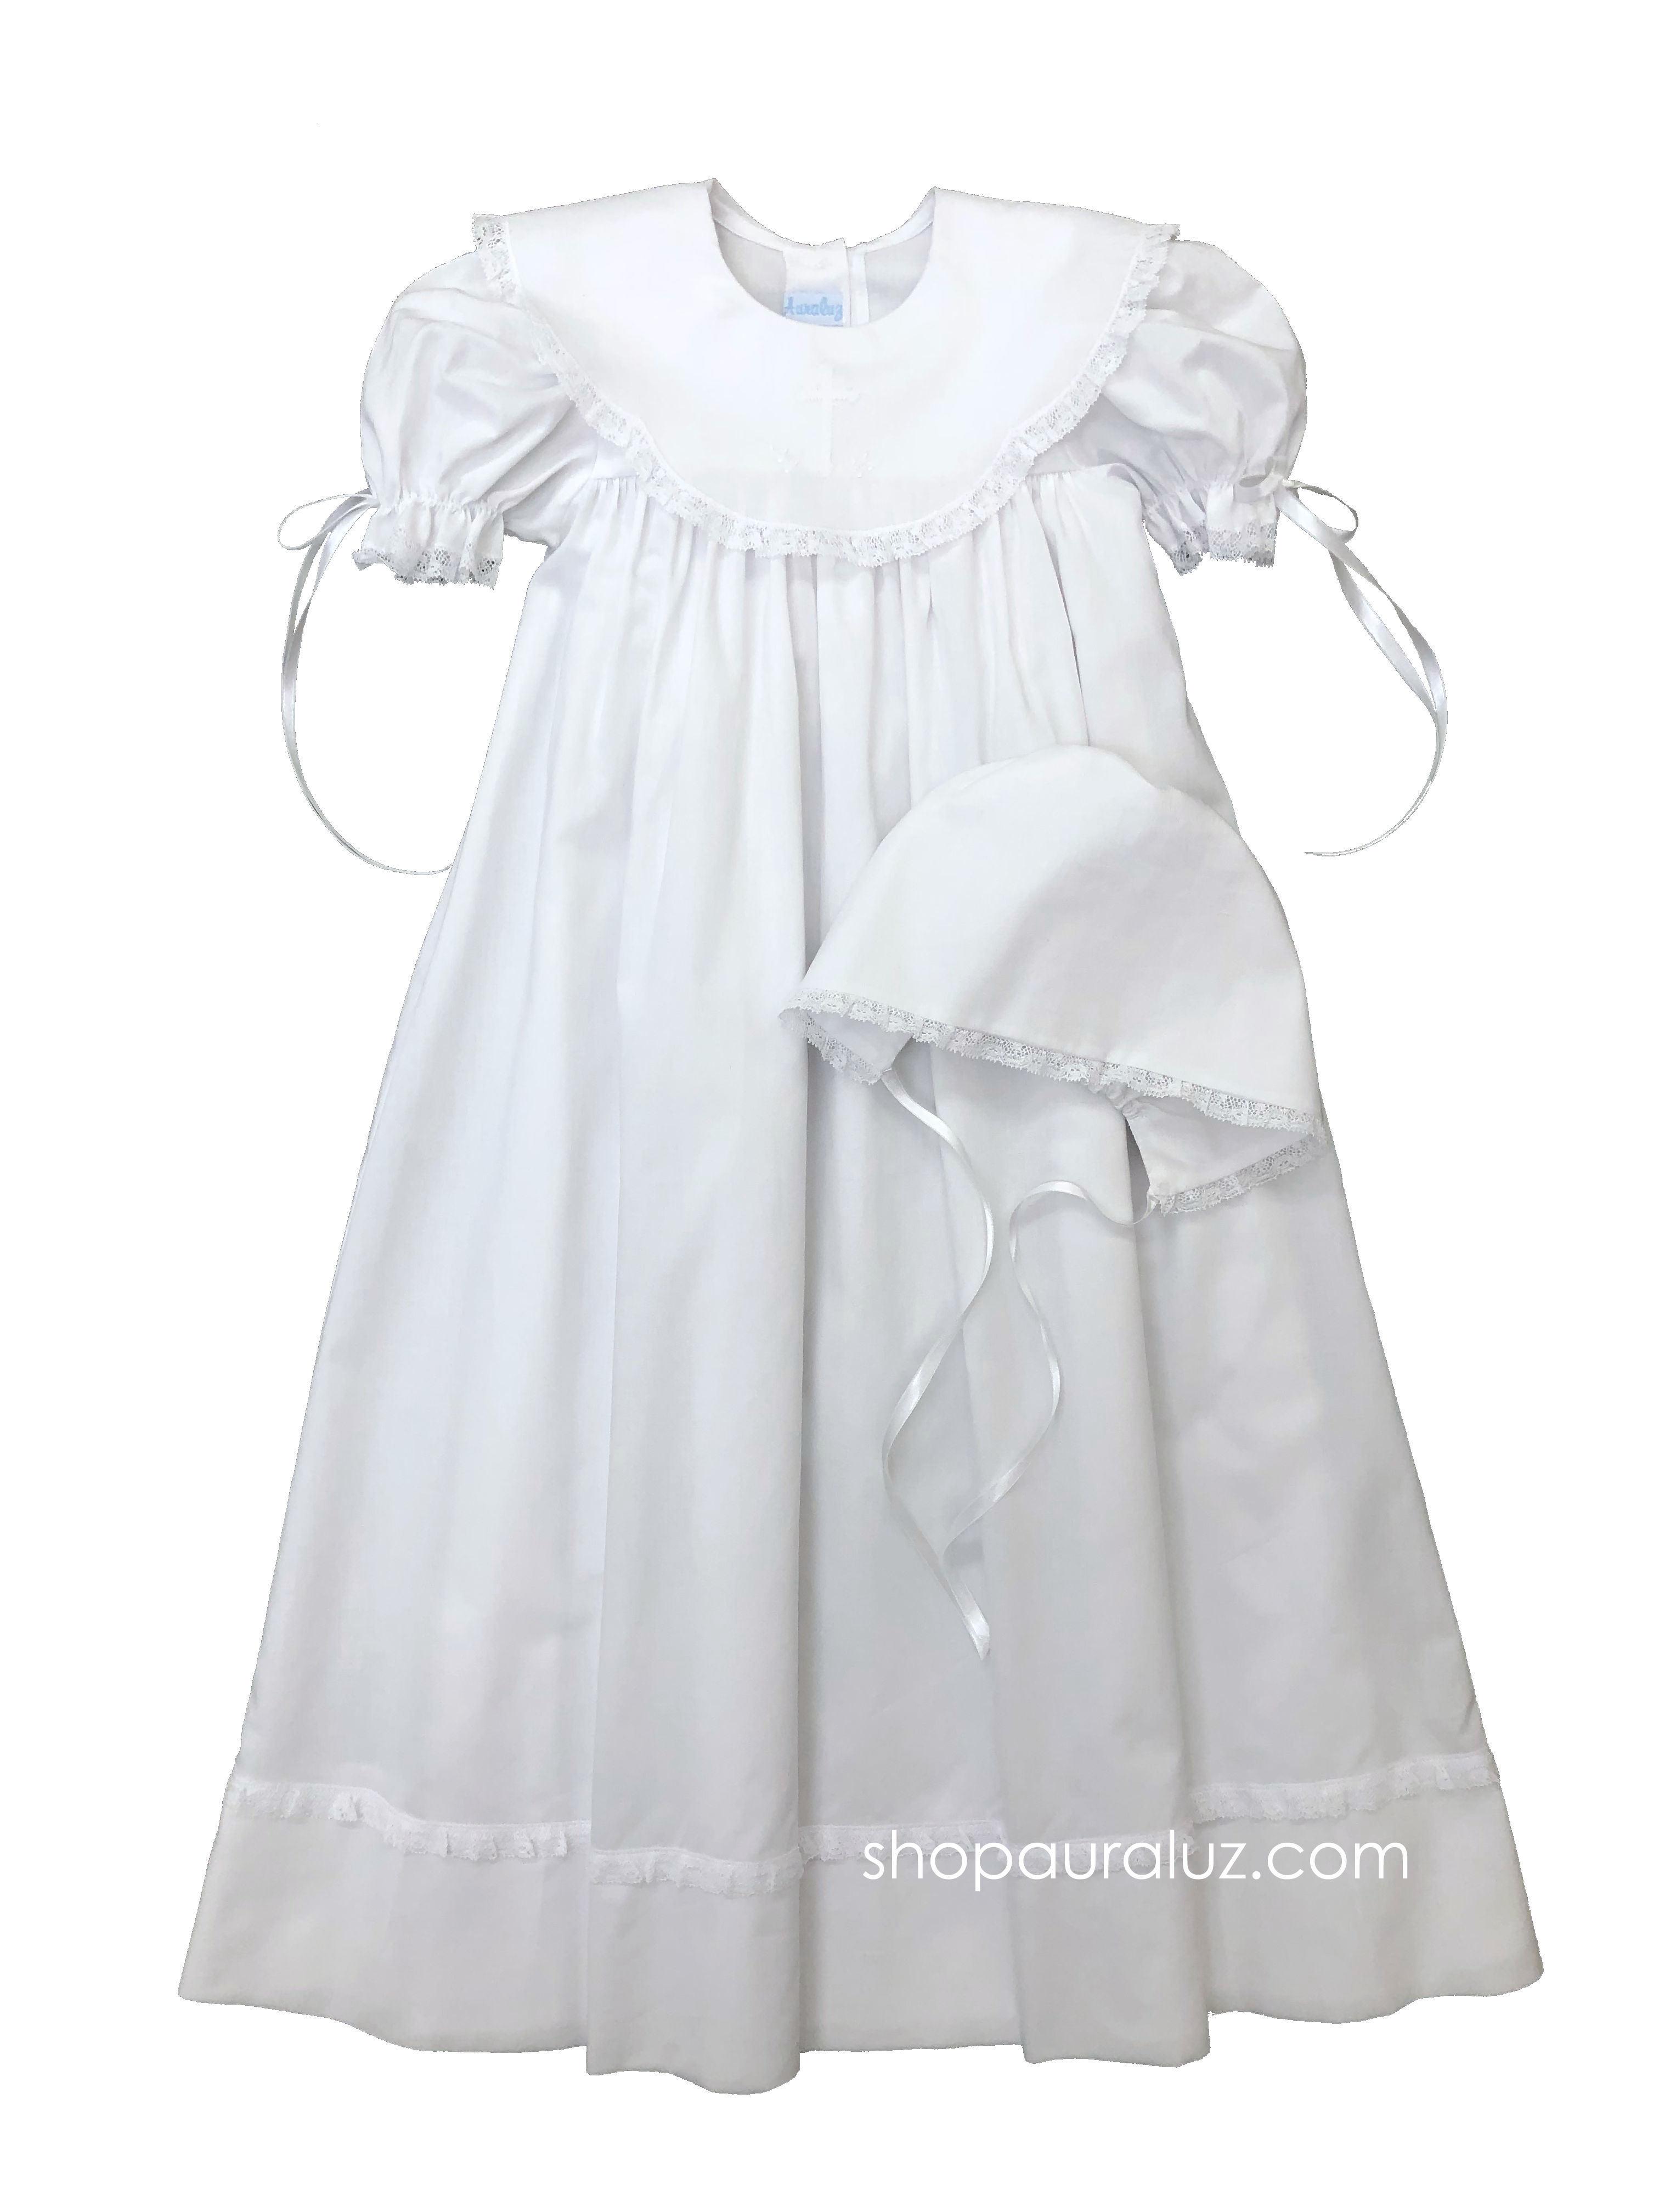 Auraluz Christening Gown/Slip/Hat...White with white lace/ribbon, scalloped round collar and embroidered cross